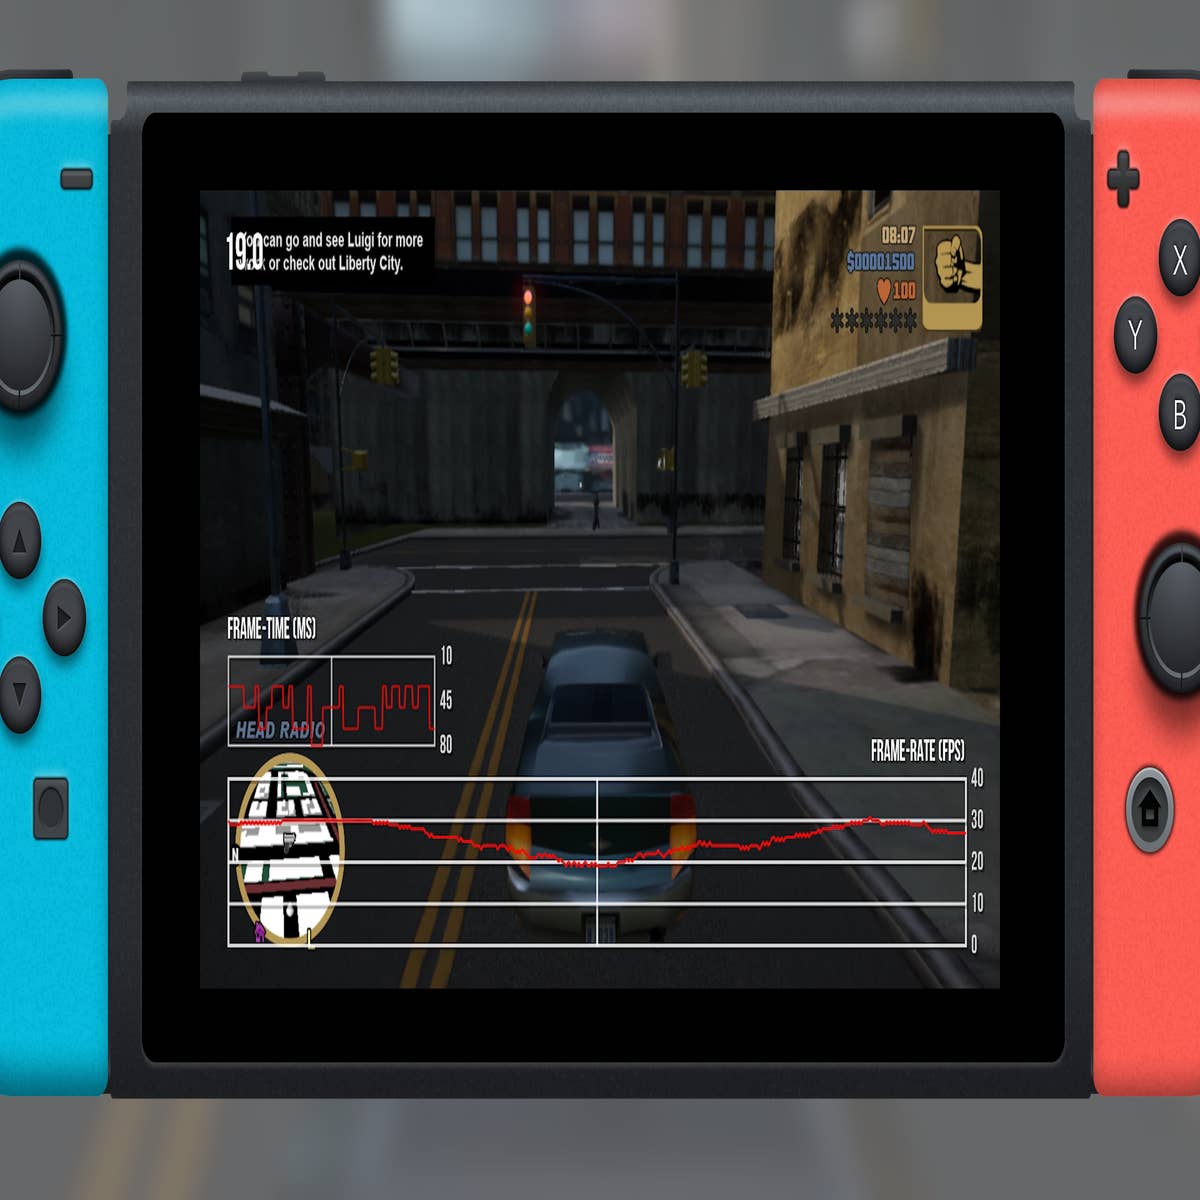 Rogue Company Switch port being delisted due to performance woes